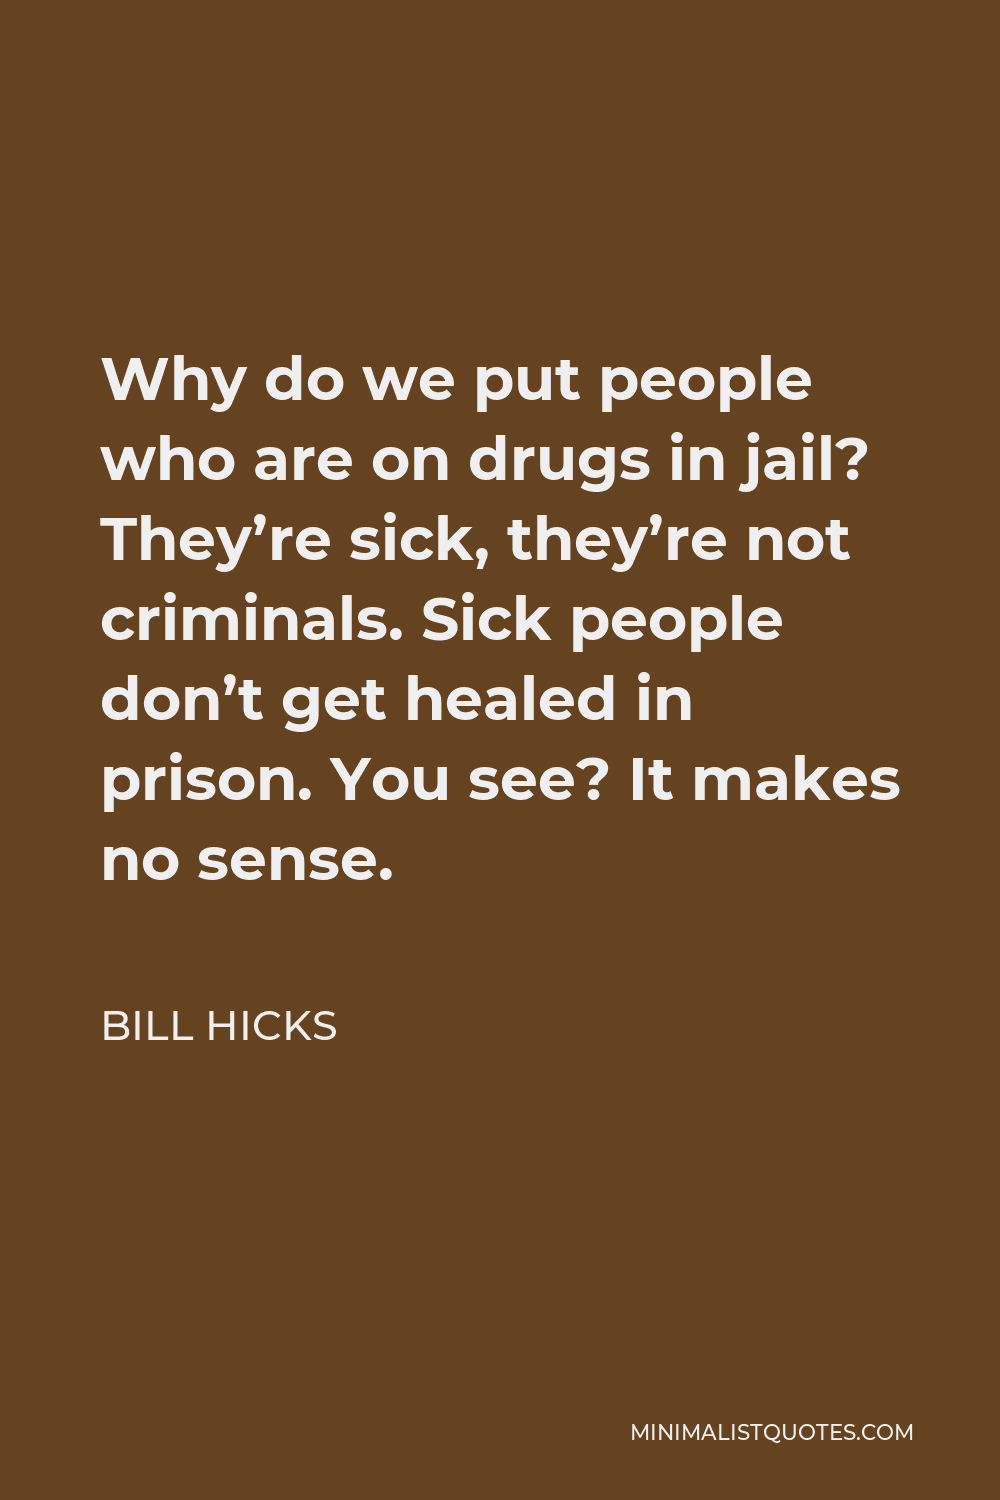 Bill Hicks Quote - Why do we put people who are on drugs in jail? They’re sick, they’re not criminals. Sick people don’t get healed in prison. You see? It makes no sense.